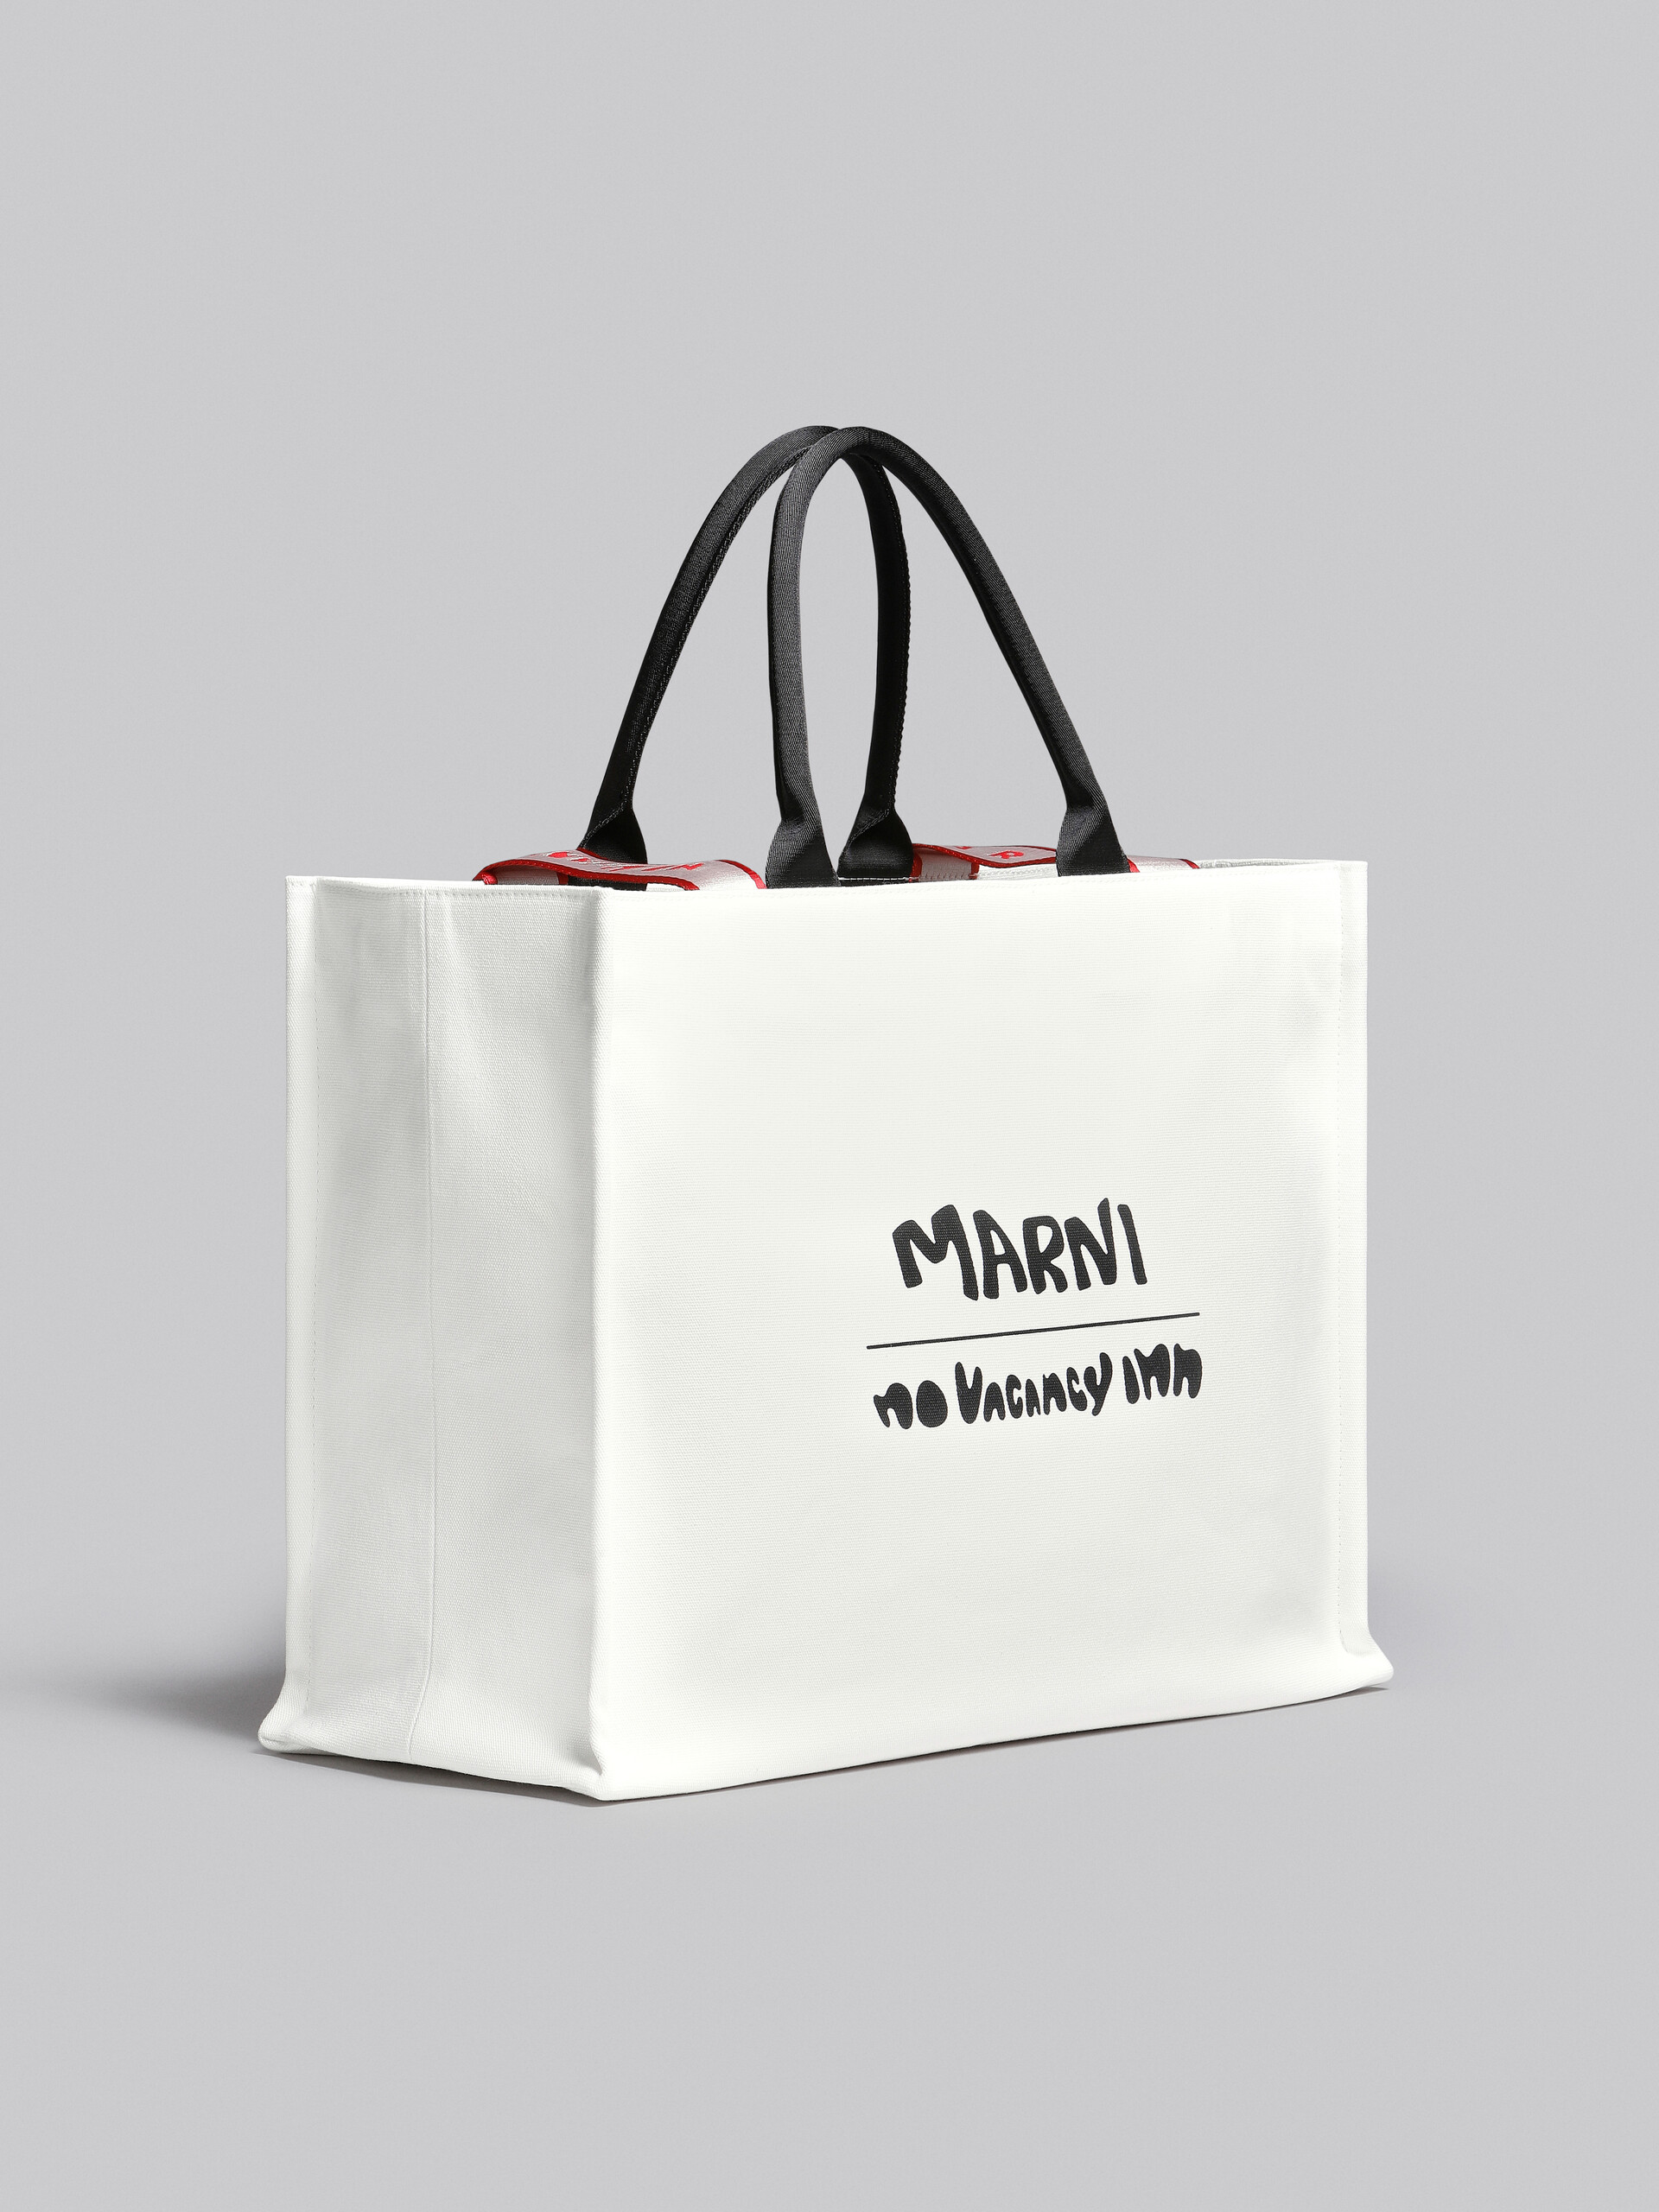 Marni x No Vacancy Inn - Bey Tote Bag in white canvas - Shopping Bags - Image 6